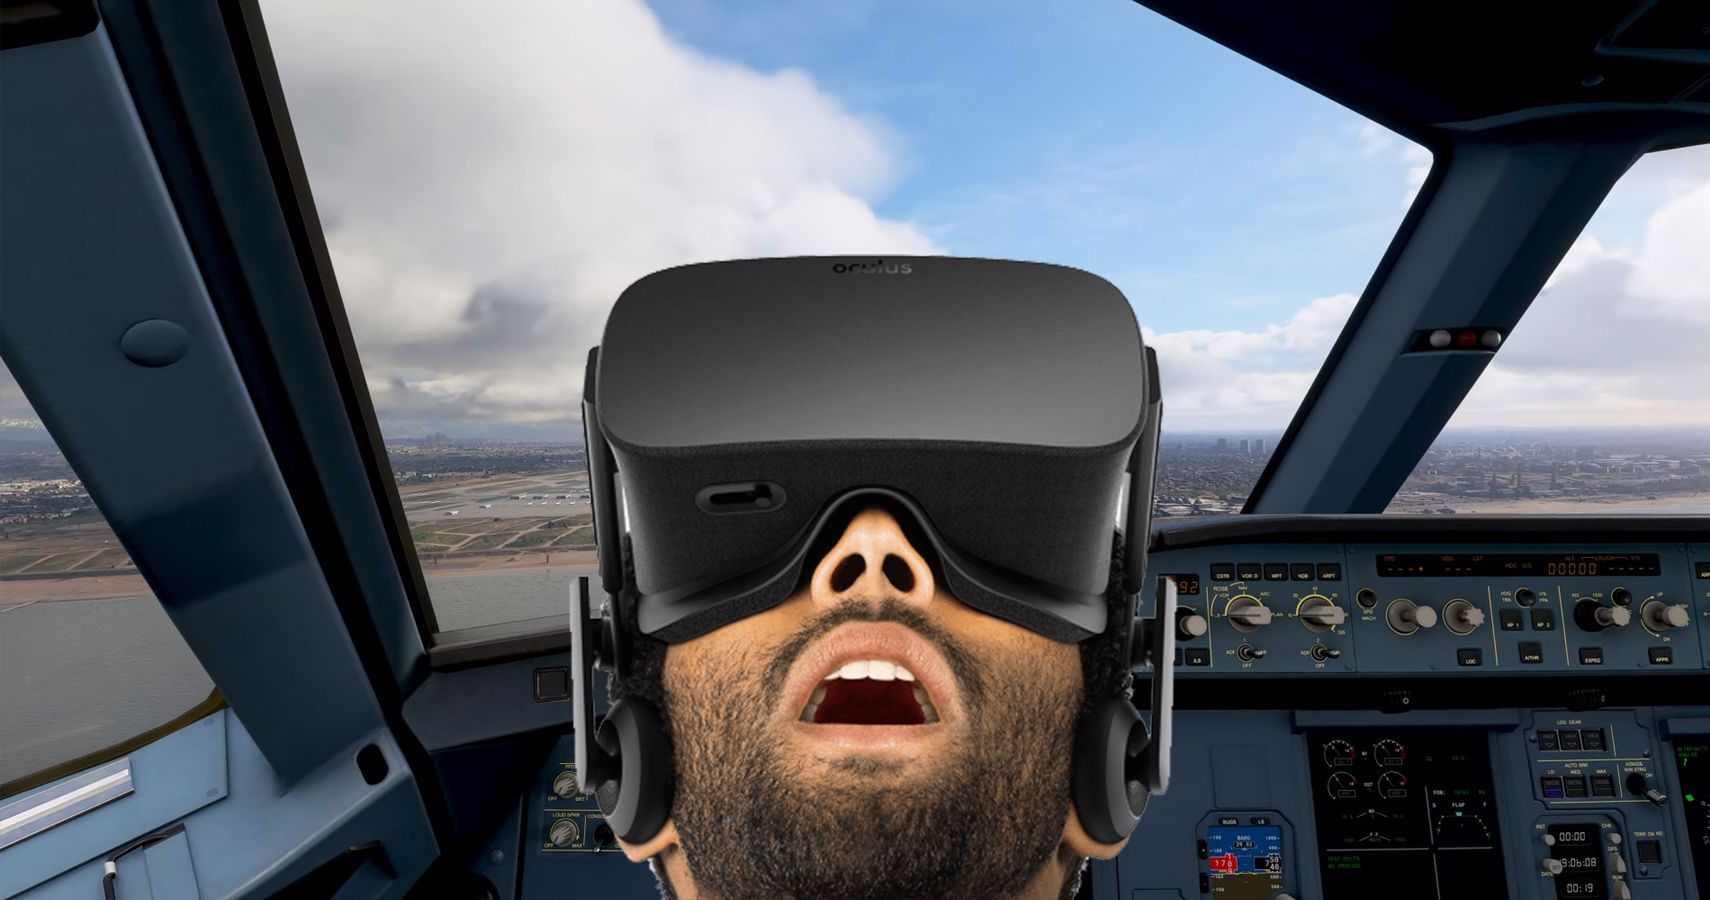 Microsoft Flight Simulator' VR Support Comes to SteamVR Headsets Today